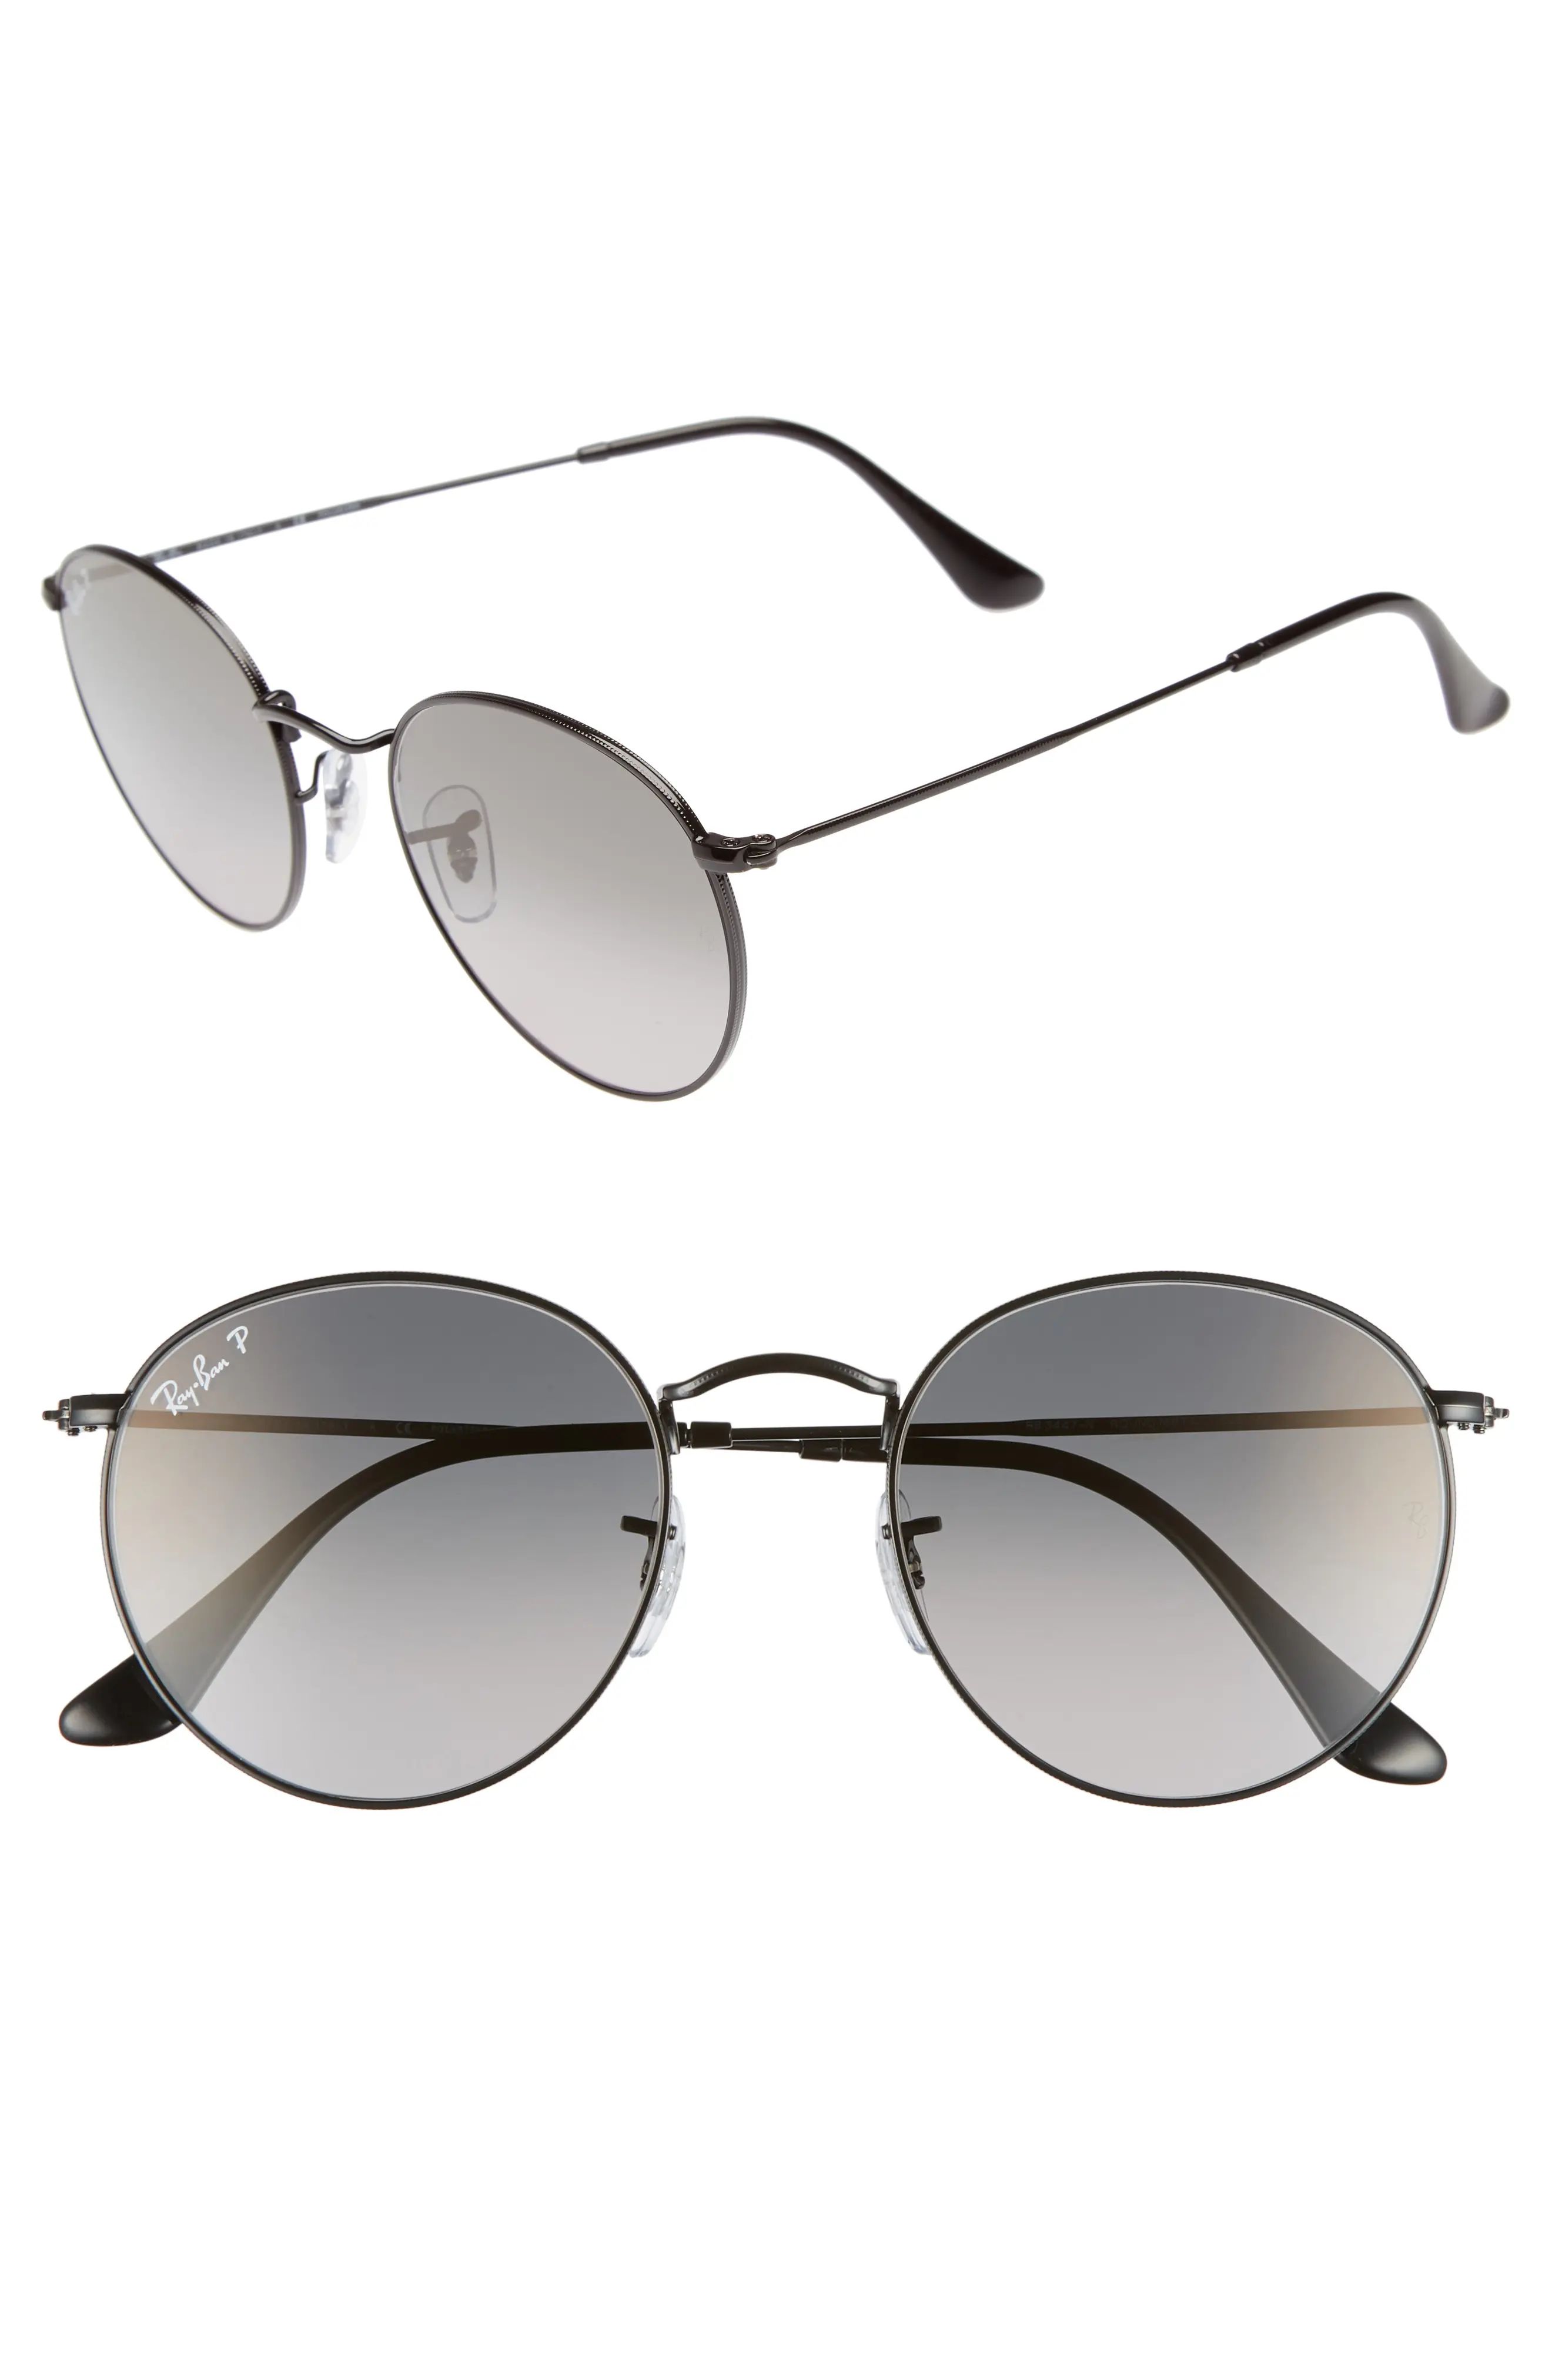 Ray-Ban 53mm Polarized Round Sunglasses | Nordstrom